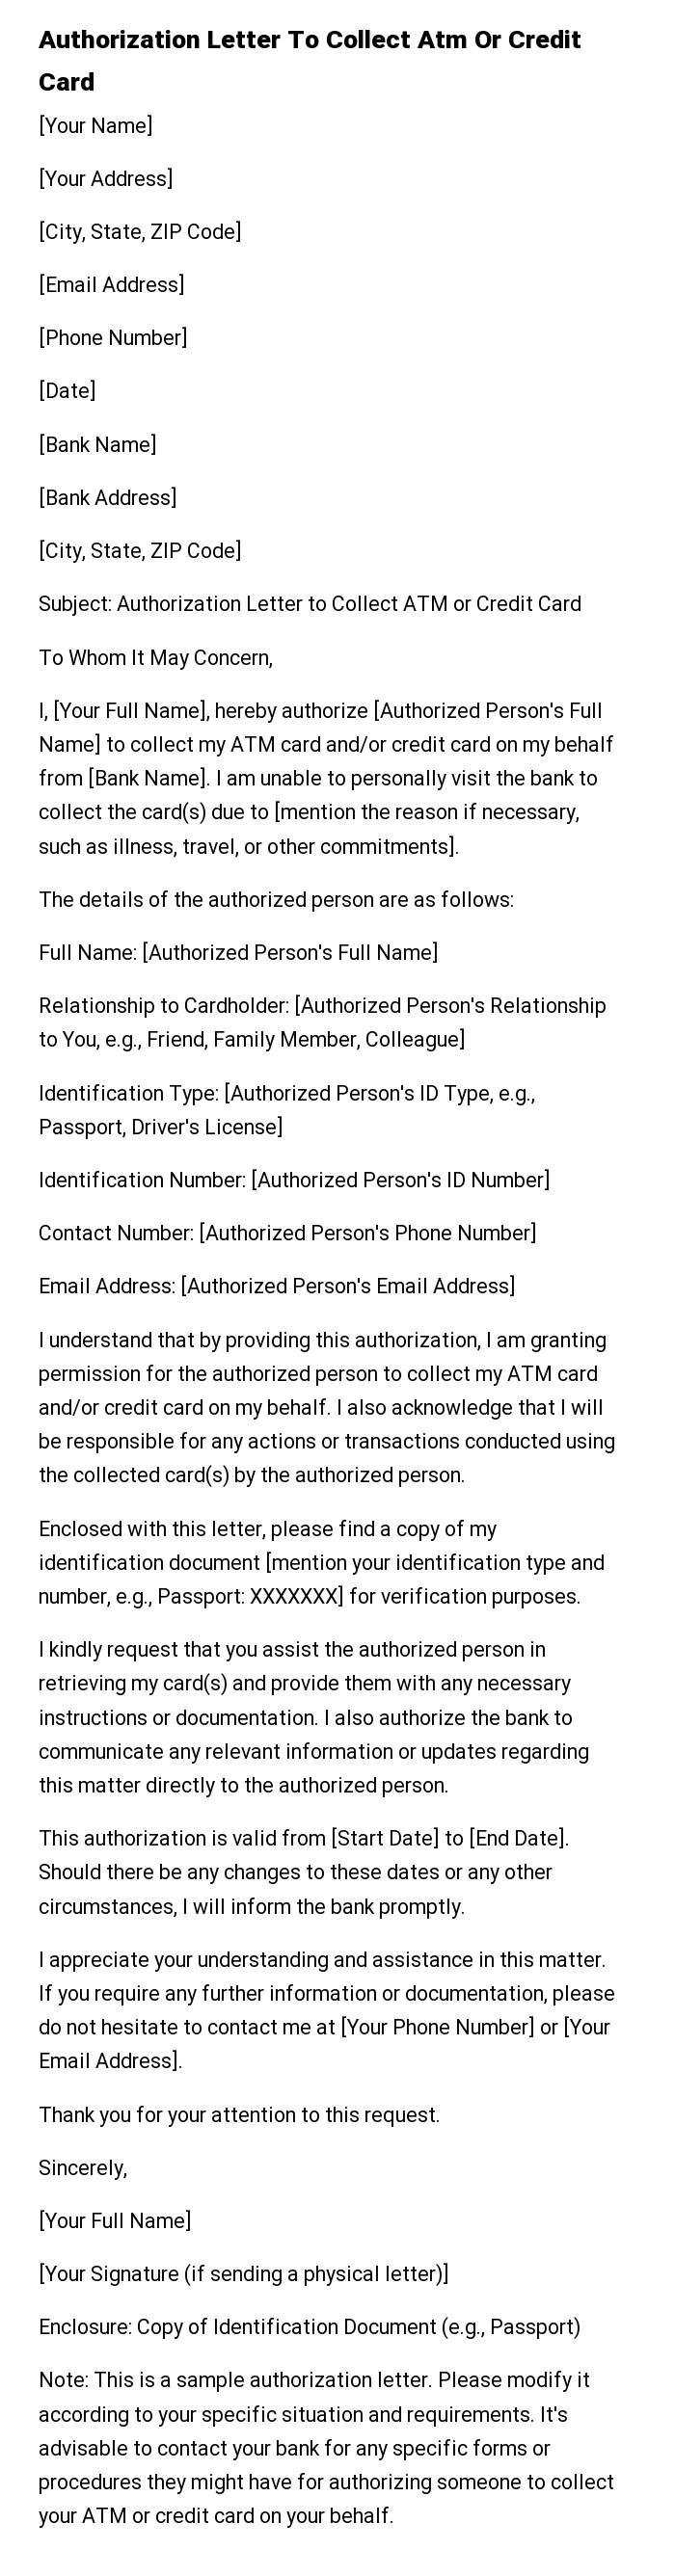 Authorization Letter To Collect Atm Or Credit Card